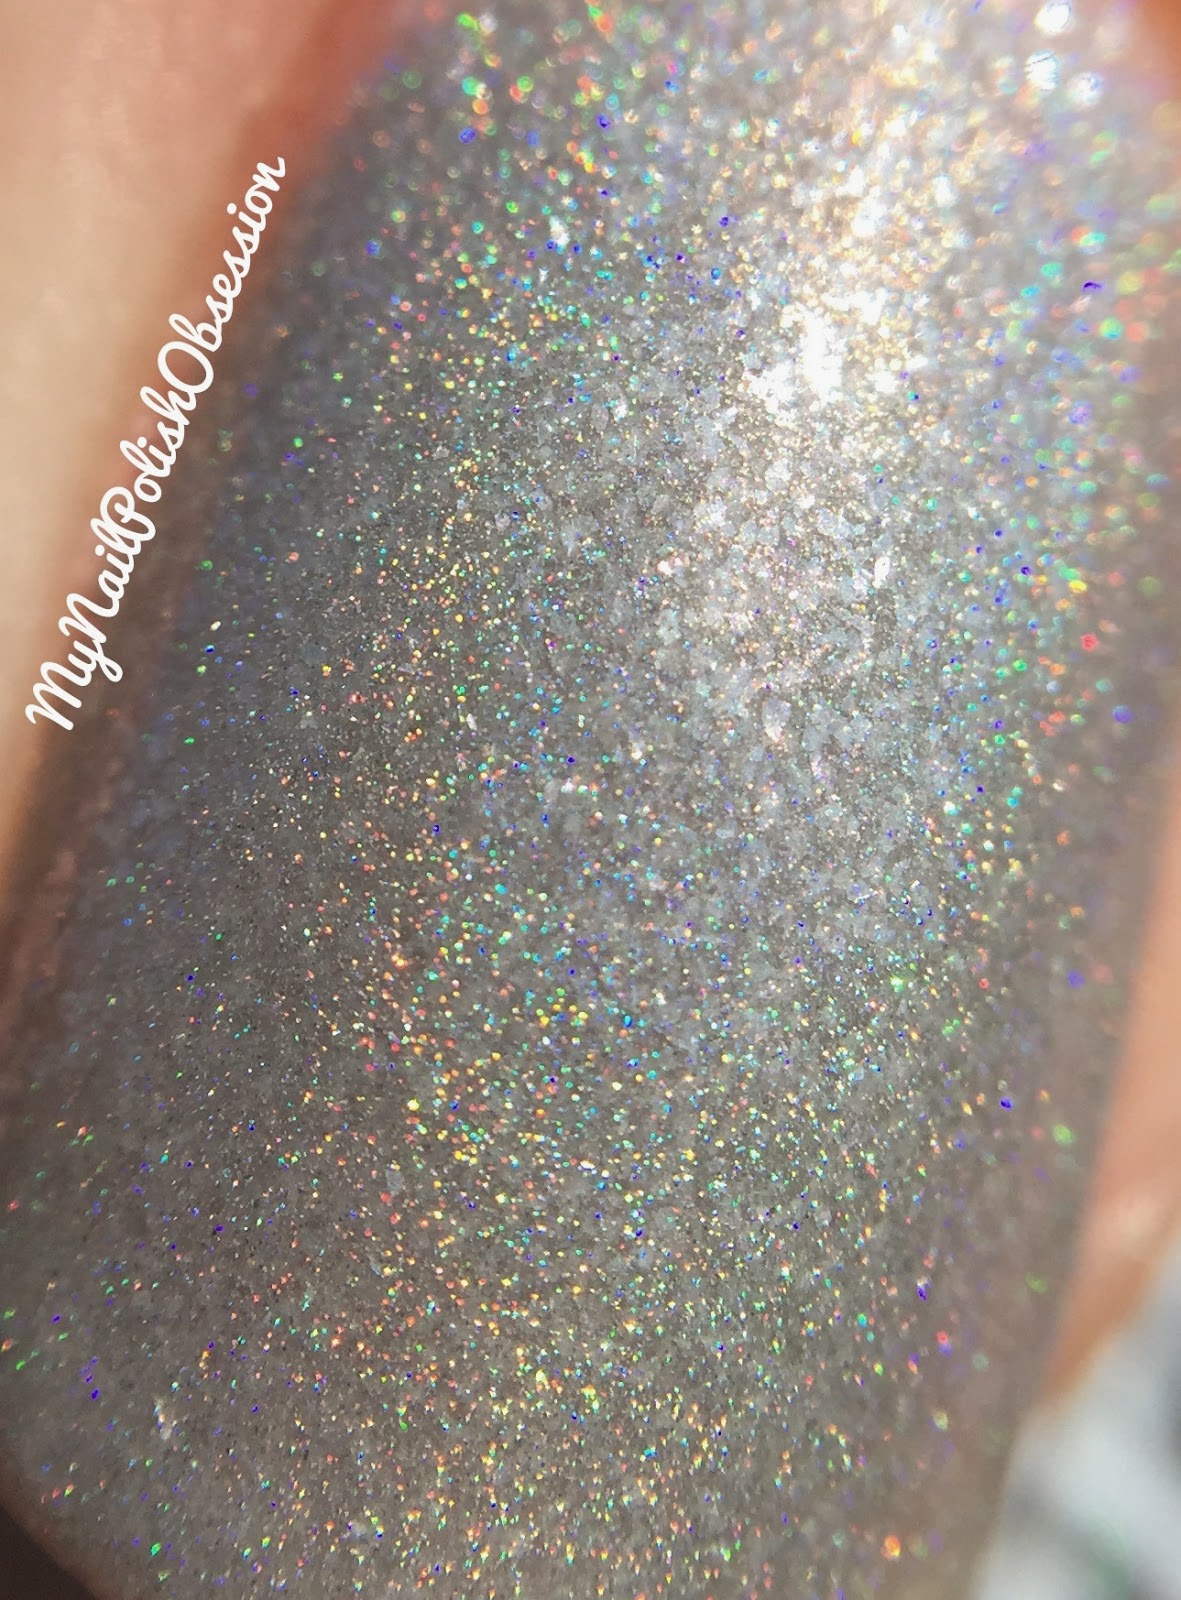 Addicted to Holos Indie Box Literary Lacquers Little Sleep Song